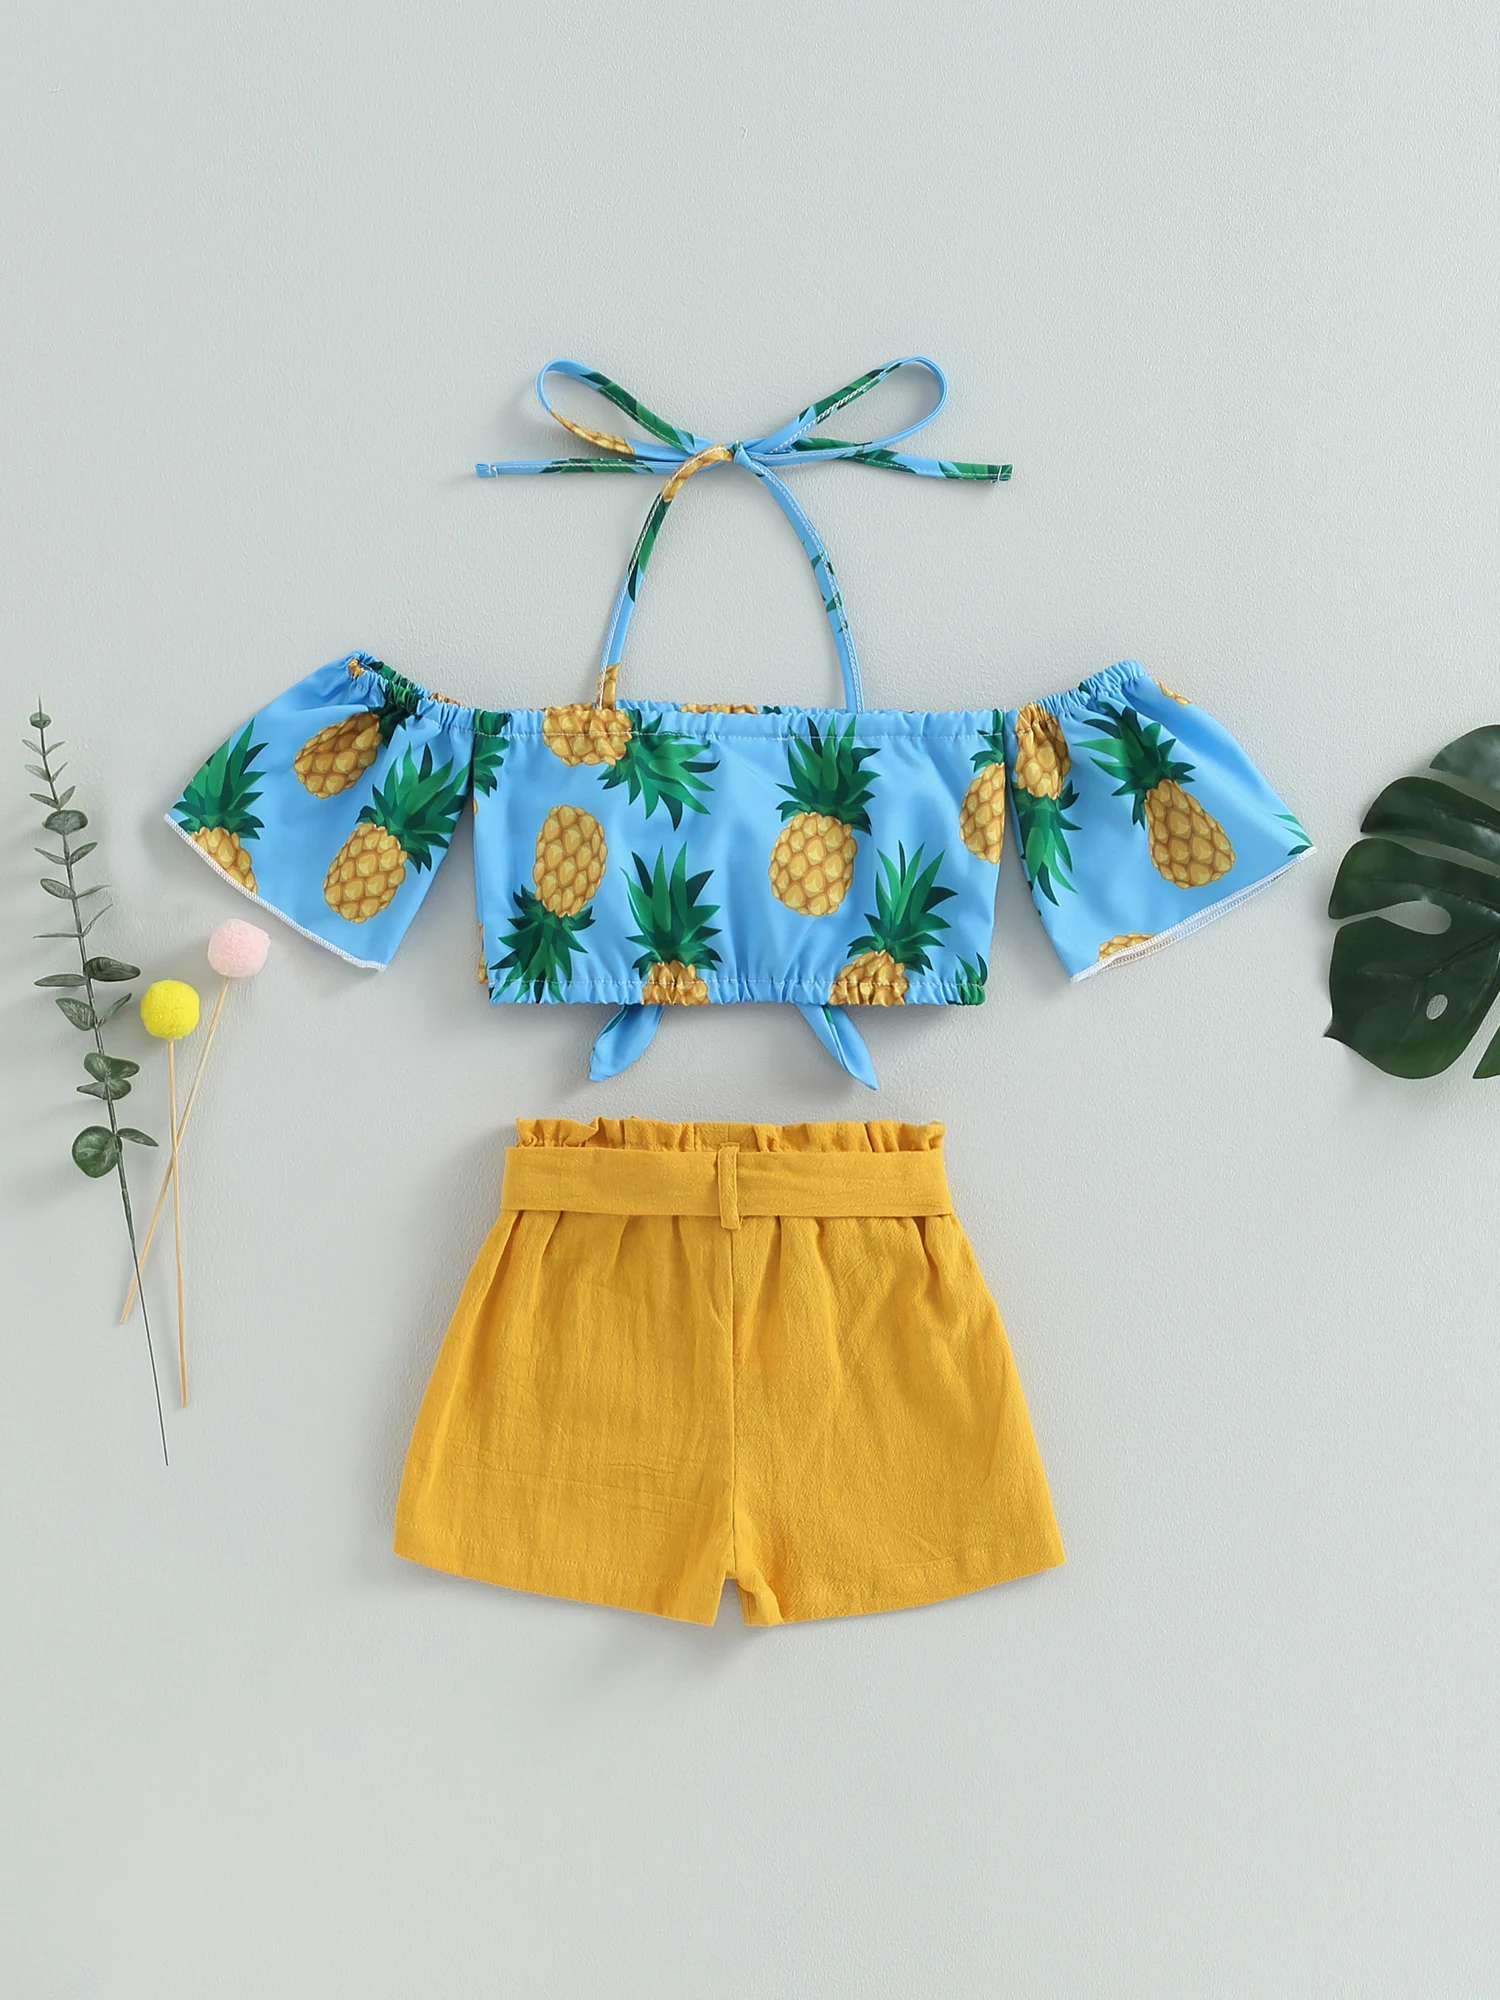 

Adorable 2-Piece Set for Girls Tie-Up Off-Shoulder Tops and Shorts with Belt Featuring Fun Pineapple Leaves and Watermelon